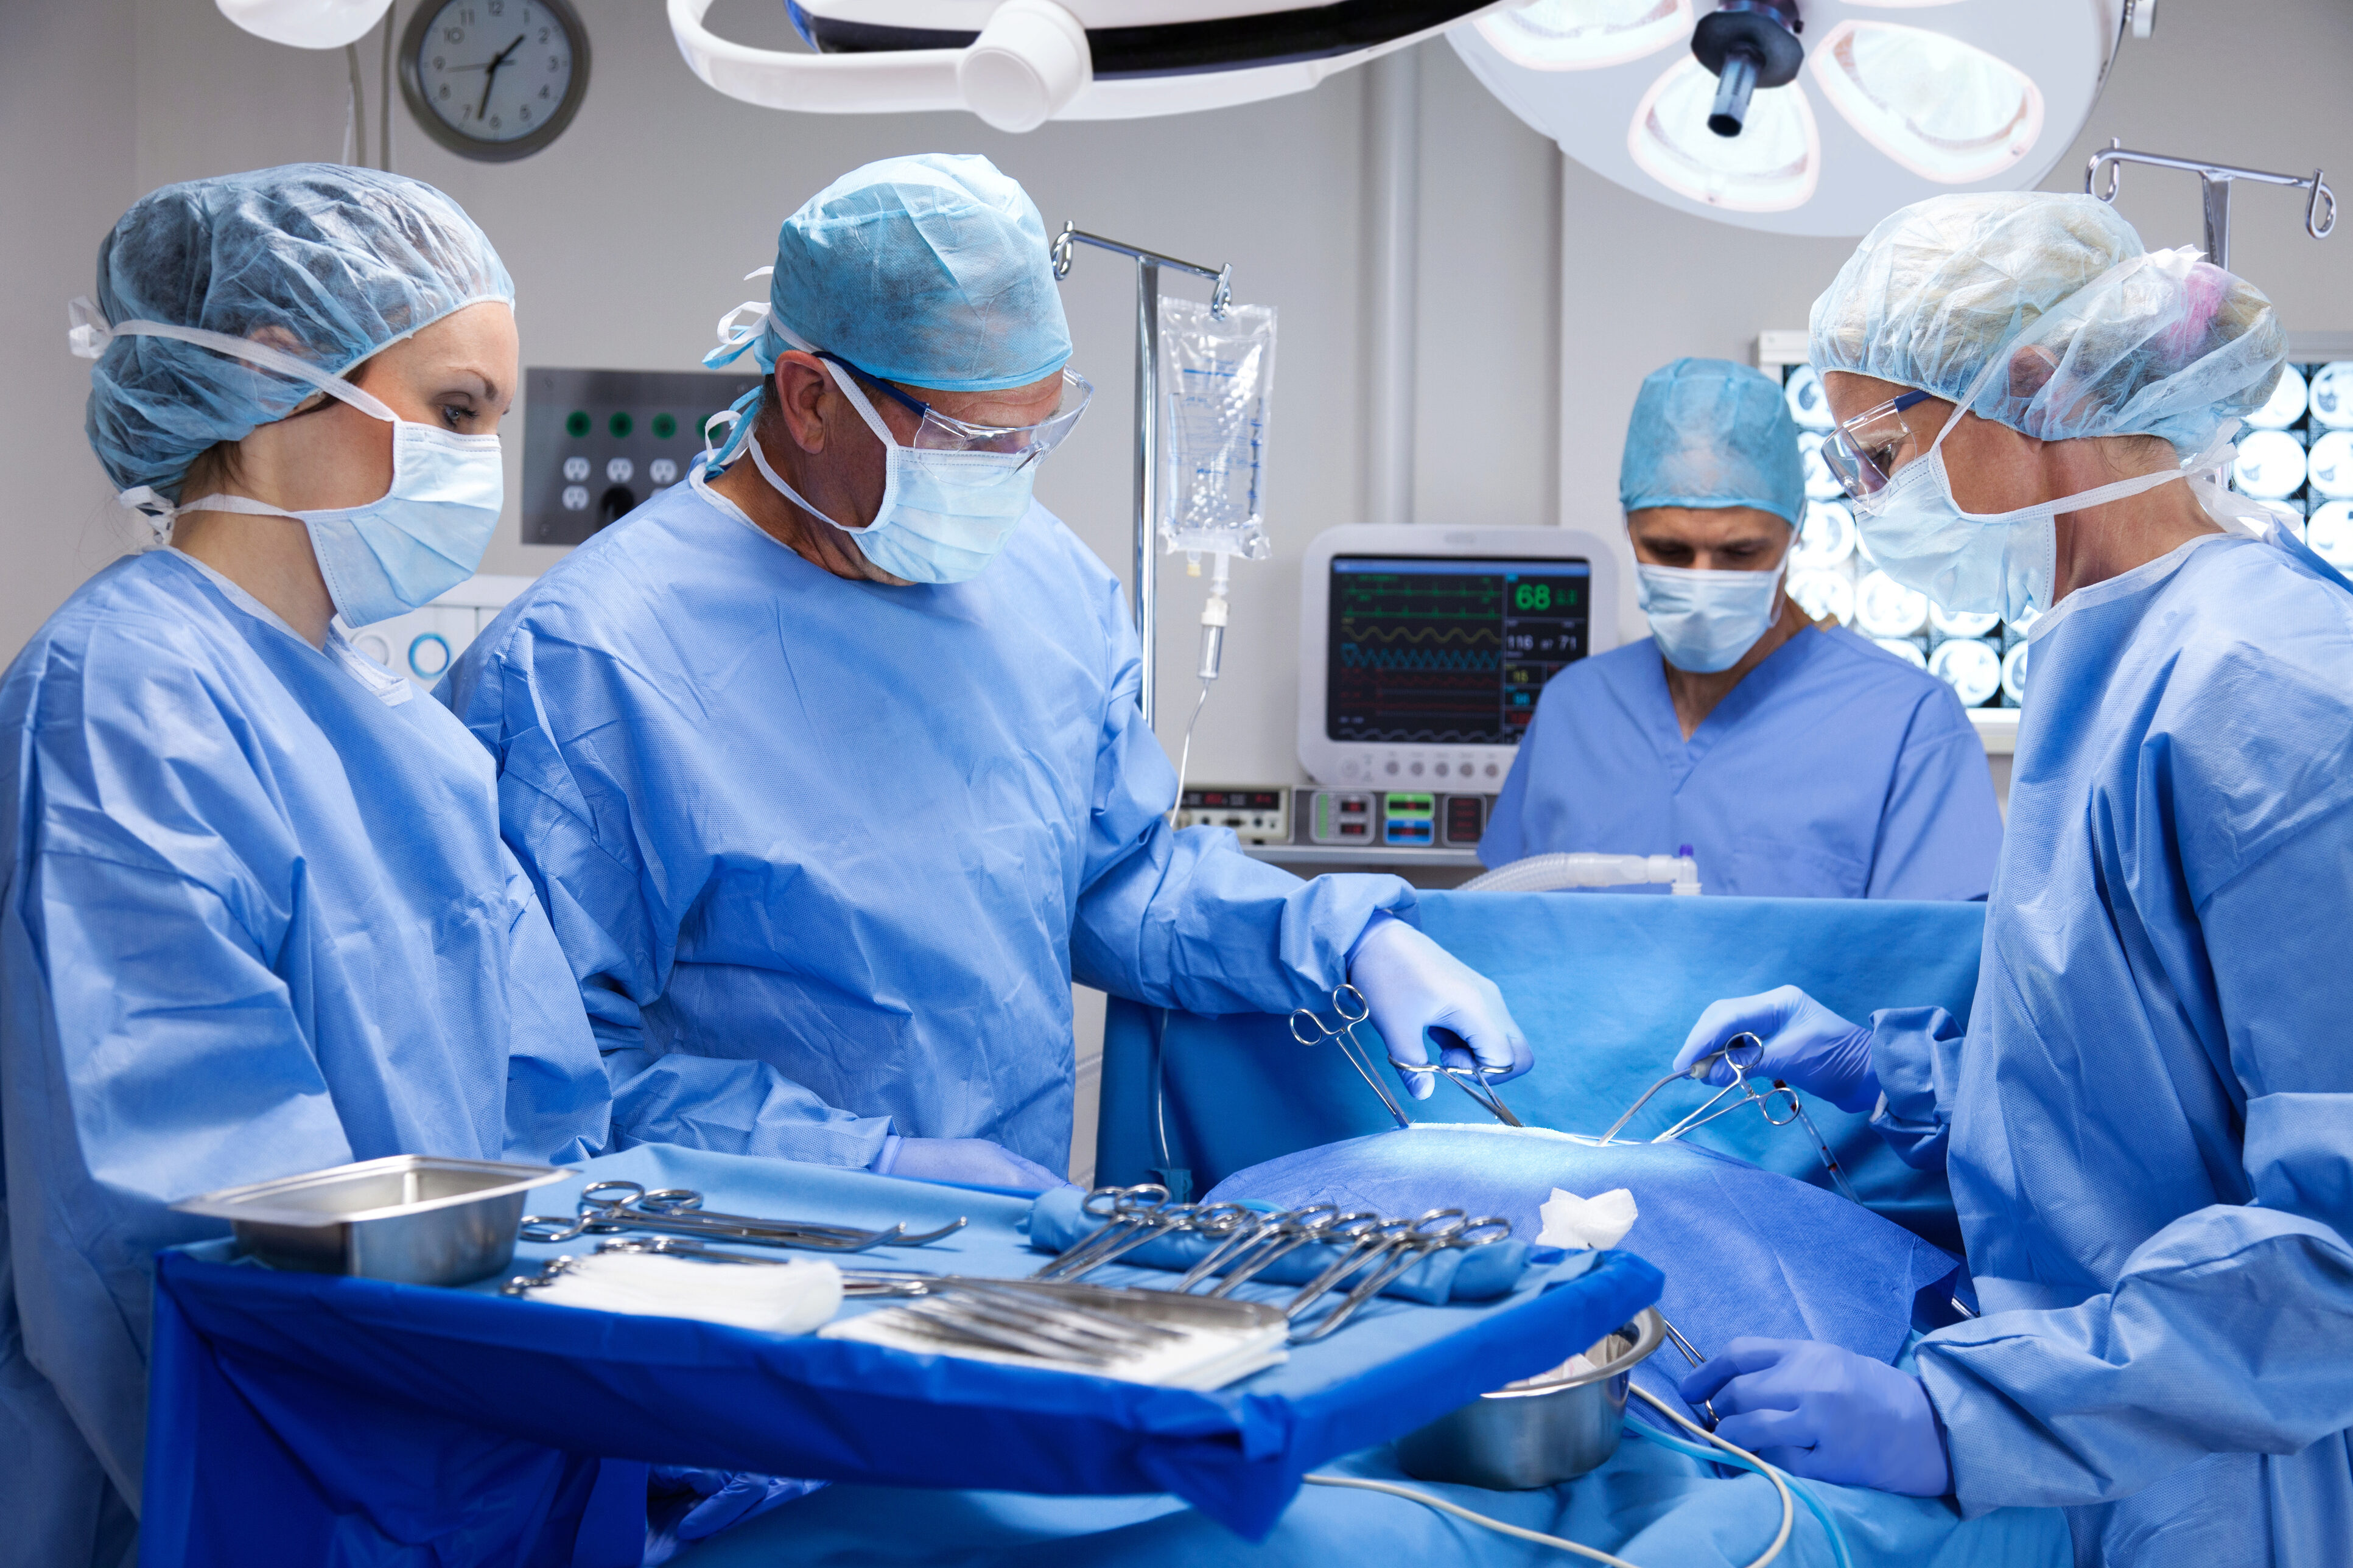 A surgical team gathered around a tray of sterlized medical equipment.